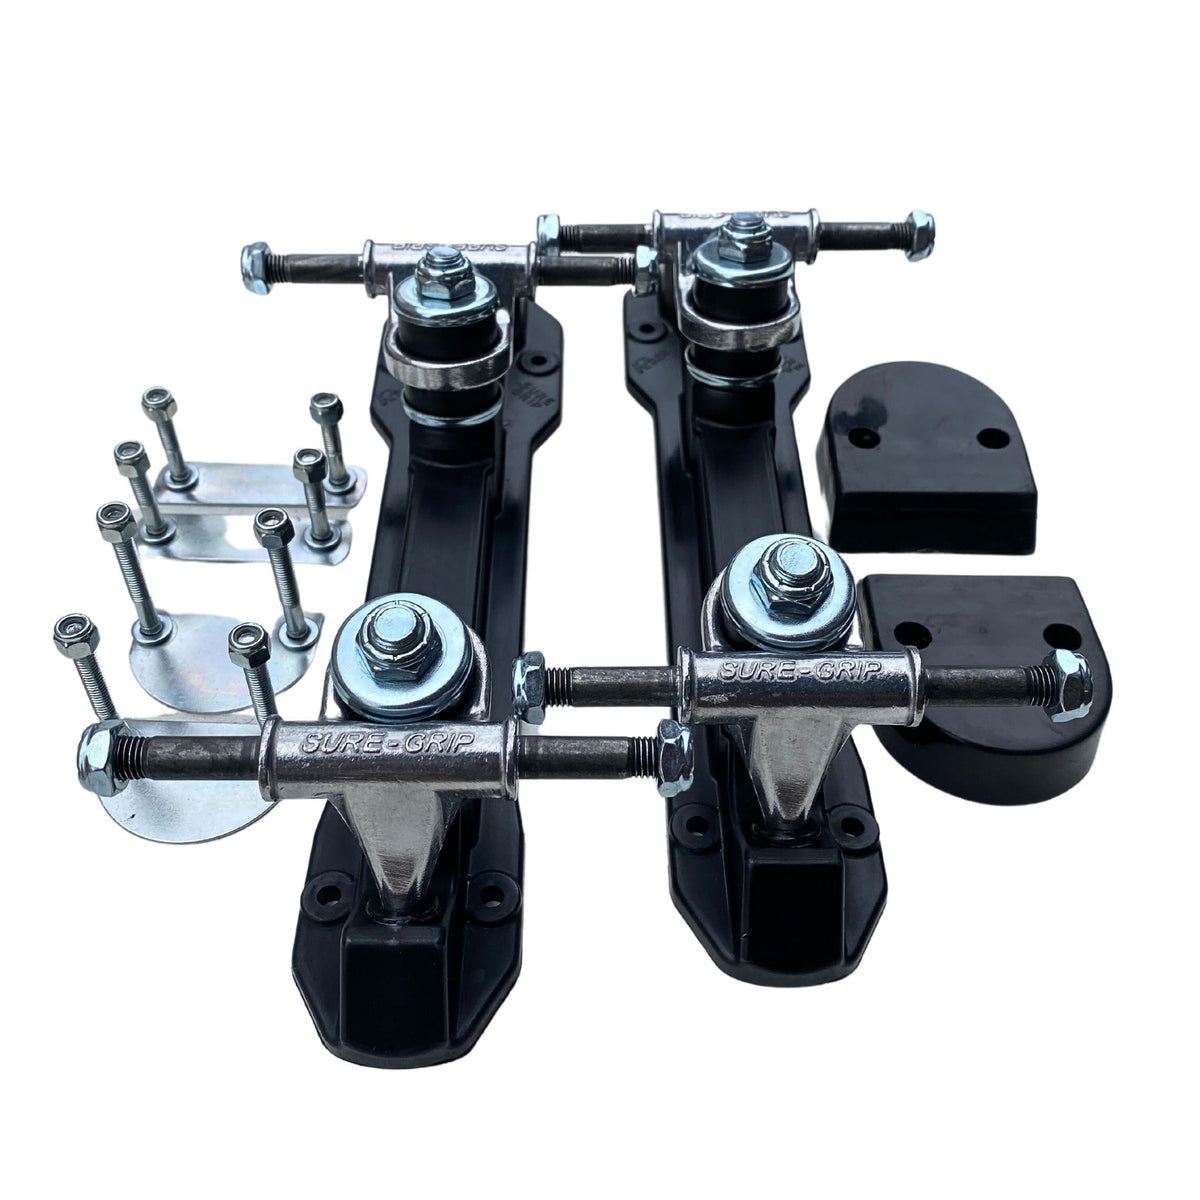 Sure Grip Rock Plates- Complete Set with Fixing Kits and Heels -Roller Skates Parts and Accessories | JT Skate